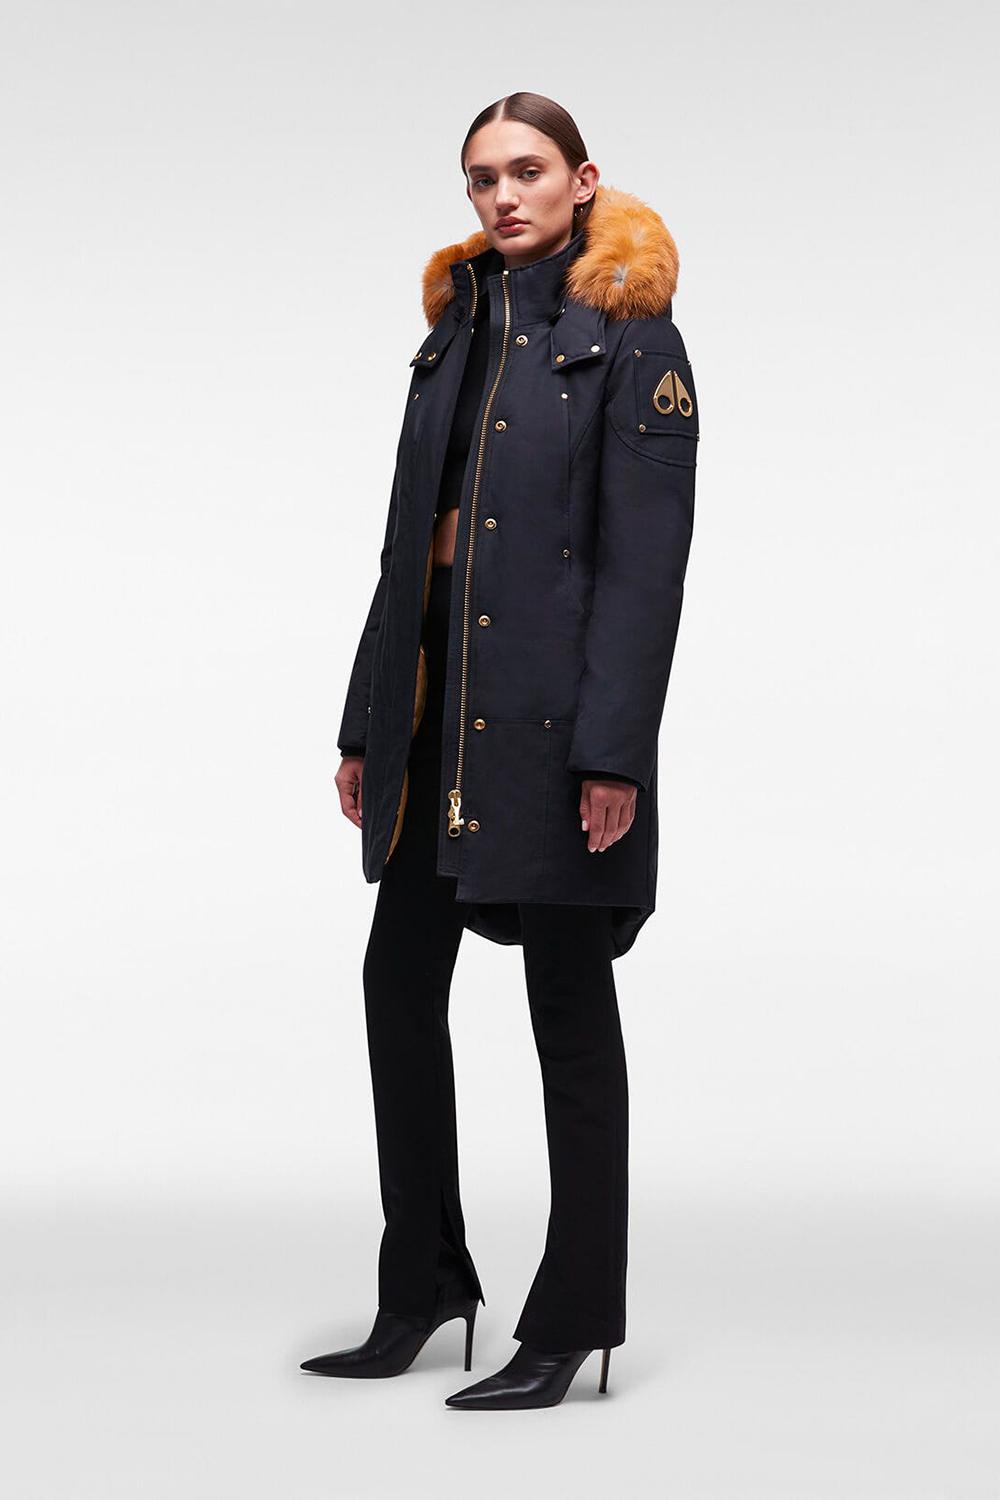 Moose Knuckles Gold Stirling Parka in Navy with Gold Fox Fur